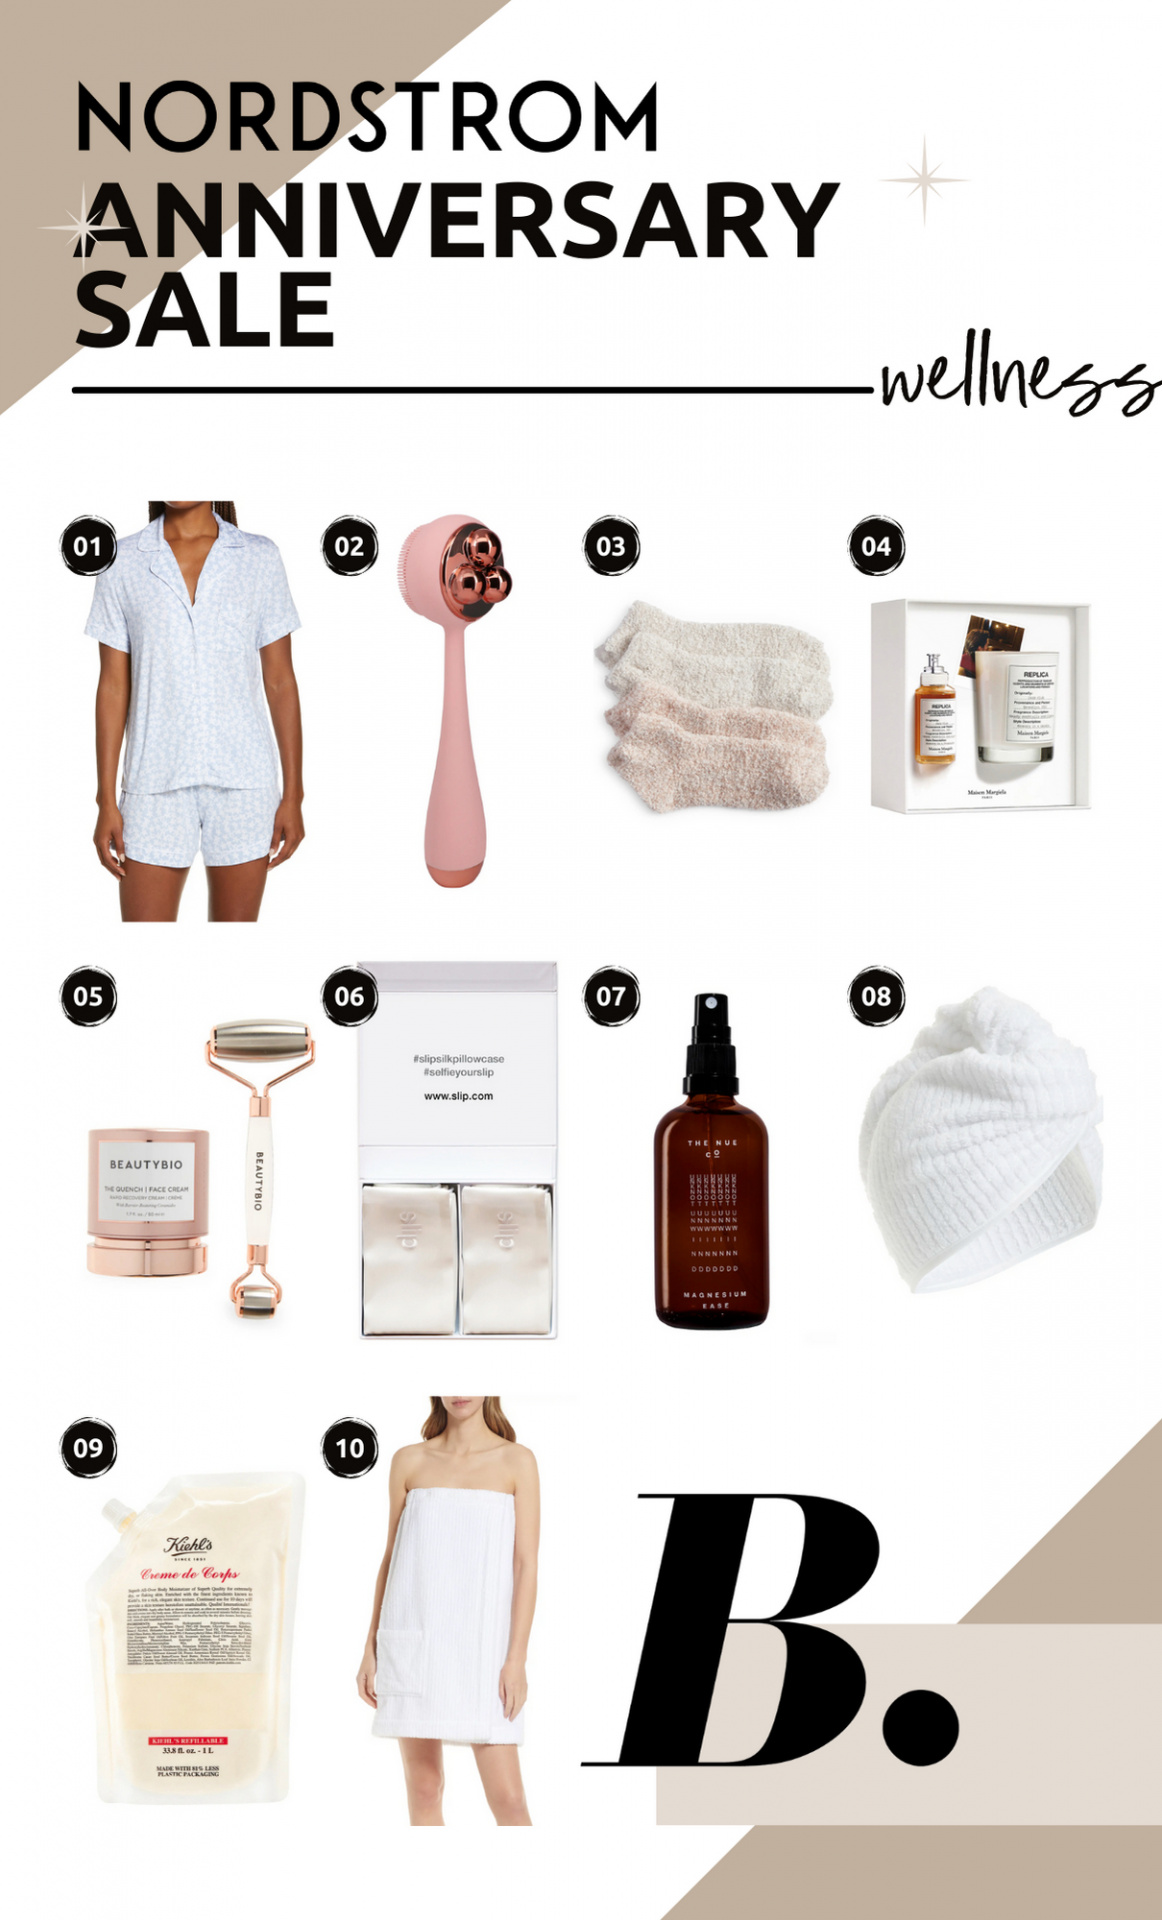 relaxing spa day at home, at home spa day kit, luxury spa at home, nsale, nsale 2022, nordstrom sale, nordstrom sale 2022, nordstrom anniversary sale, nordstrom anniversary sale 2022, nordstrom anniversary sale beauty, nordstrom anniversary sale wellness, what to buy at the nordstrom anniversary sale